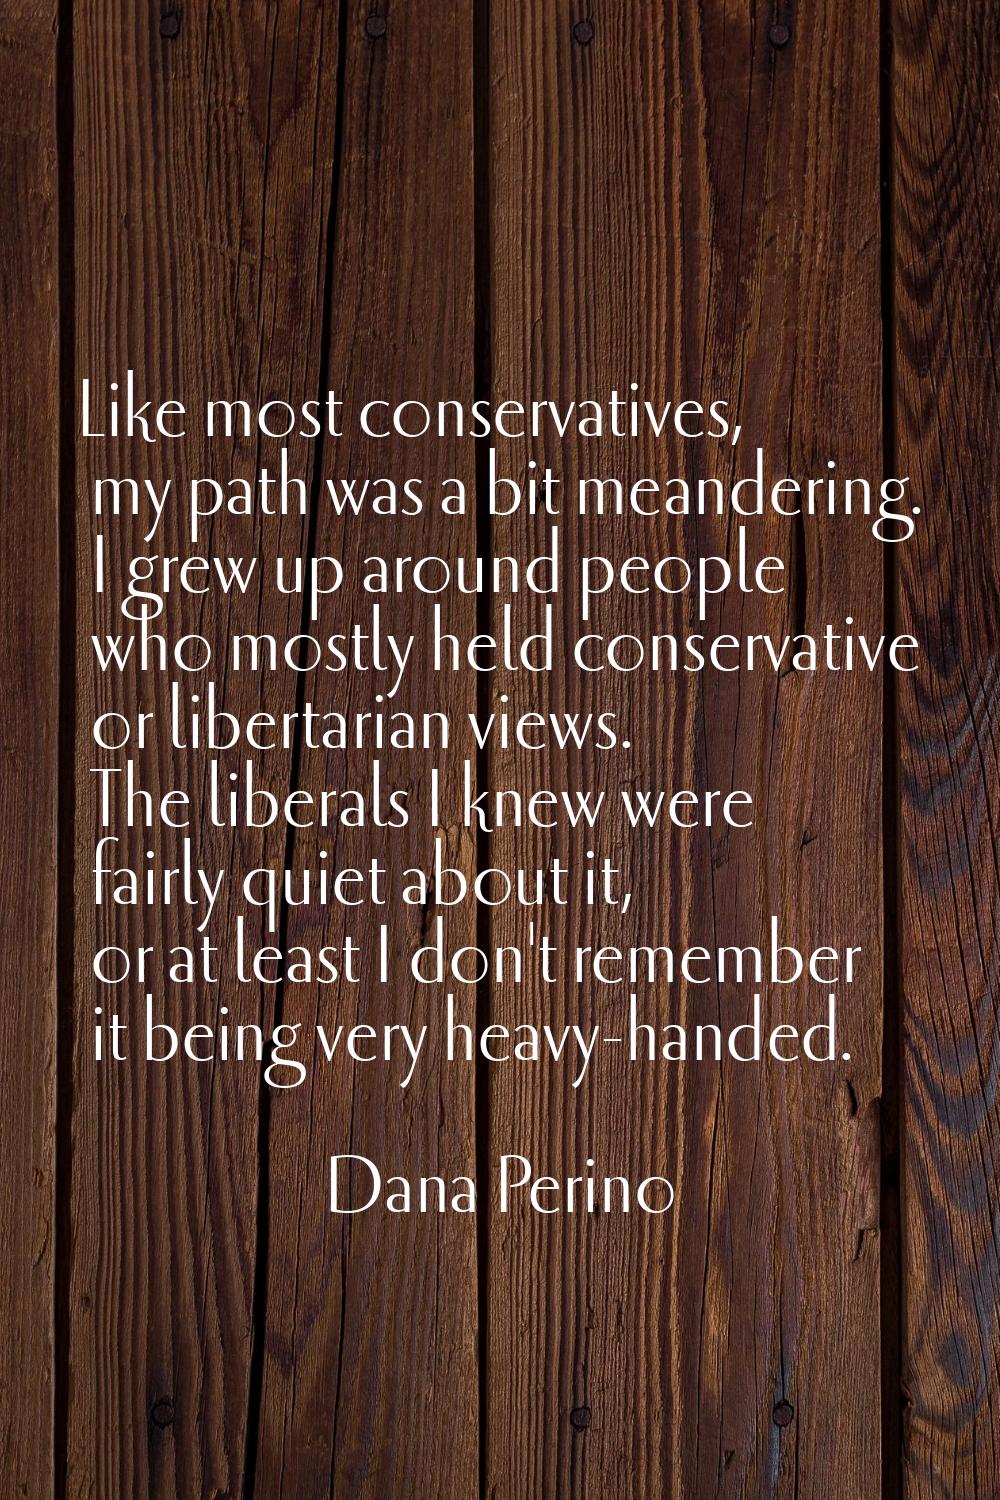 Like most conservatives, my path was a bit meandering. I grew up around people who mostly held cons